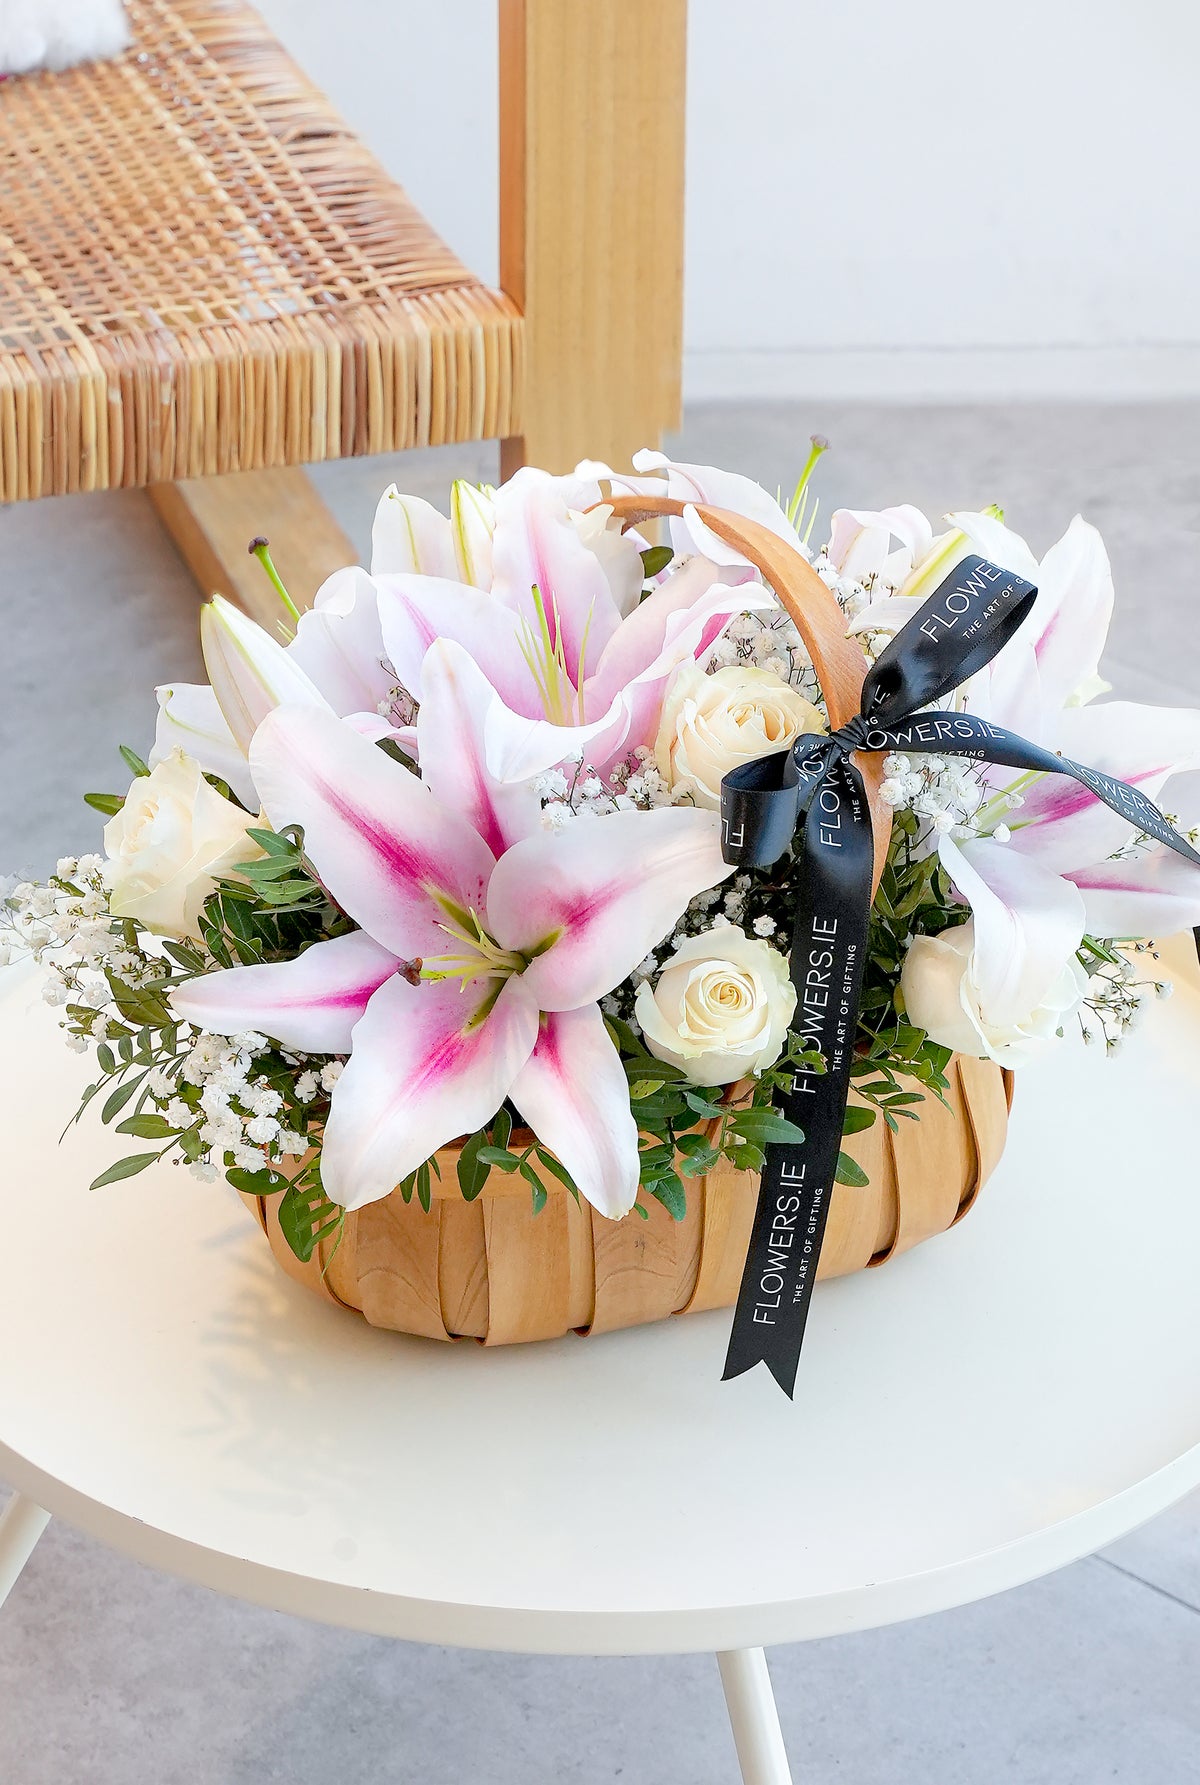 White Roses and Pink Lily Basket